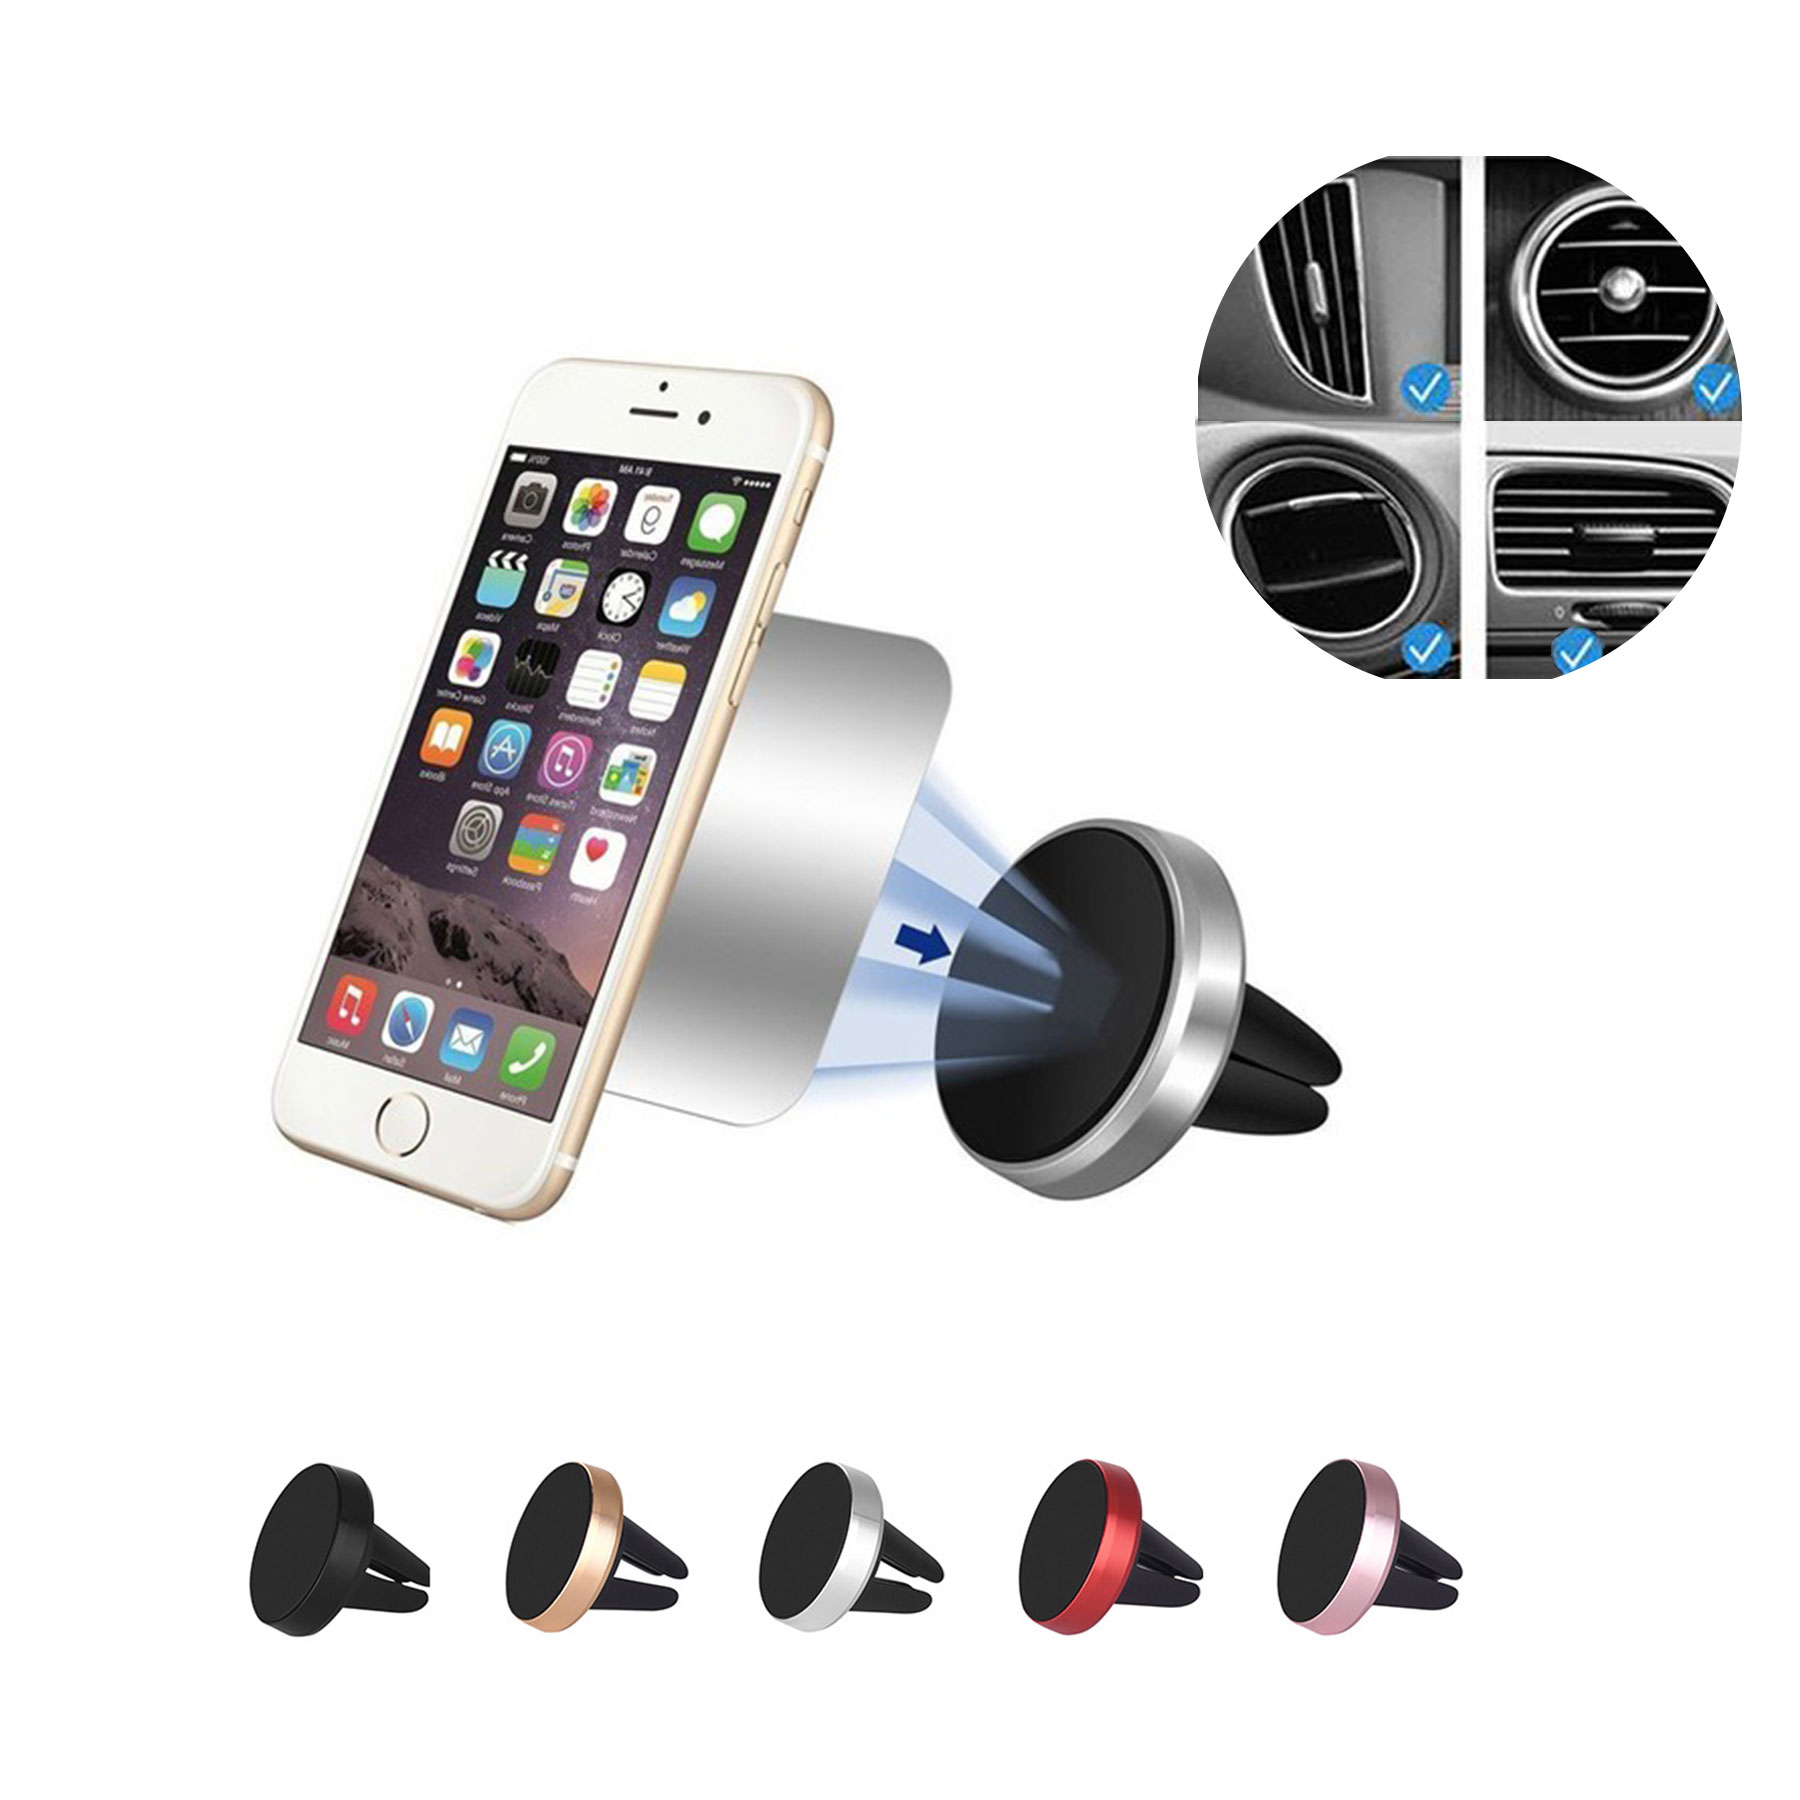 GL-GYT1016 Auto Air Vent Magnetic Phone Holder